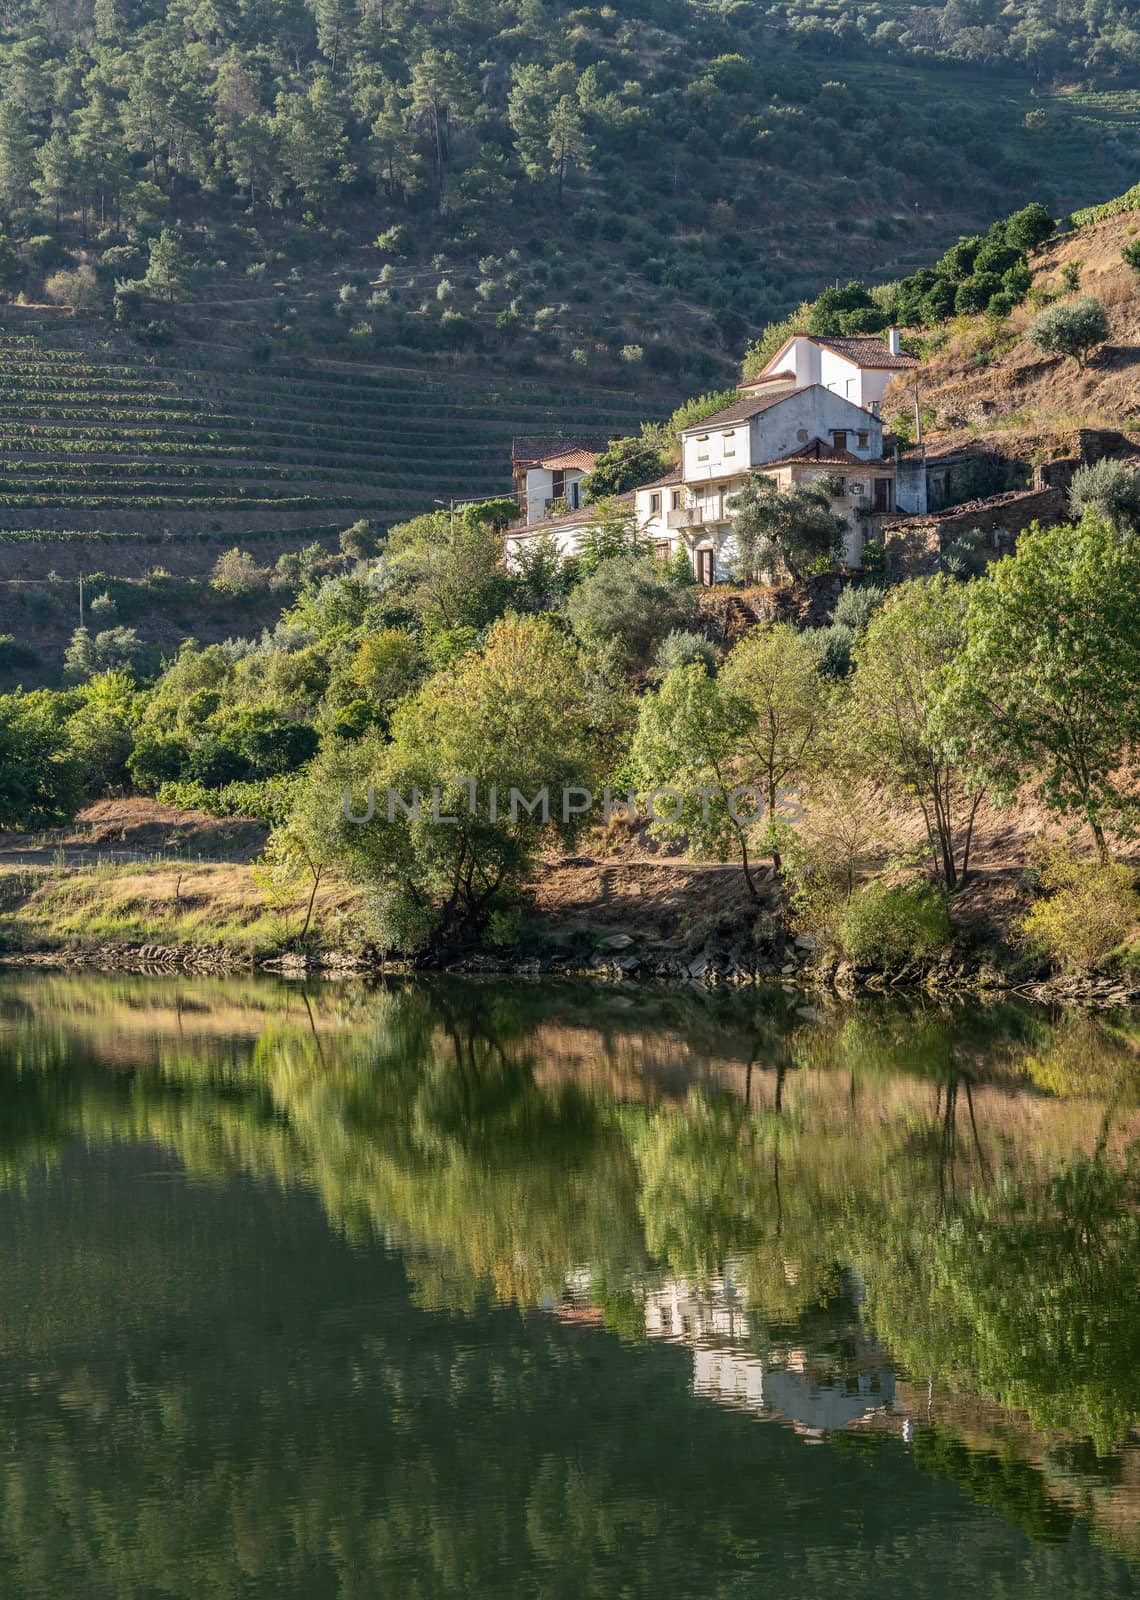 Old Quinta or vineyard on the banks of the Douro river in Portugal by steheap